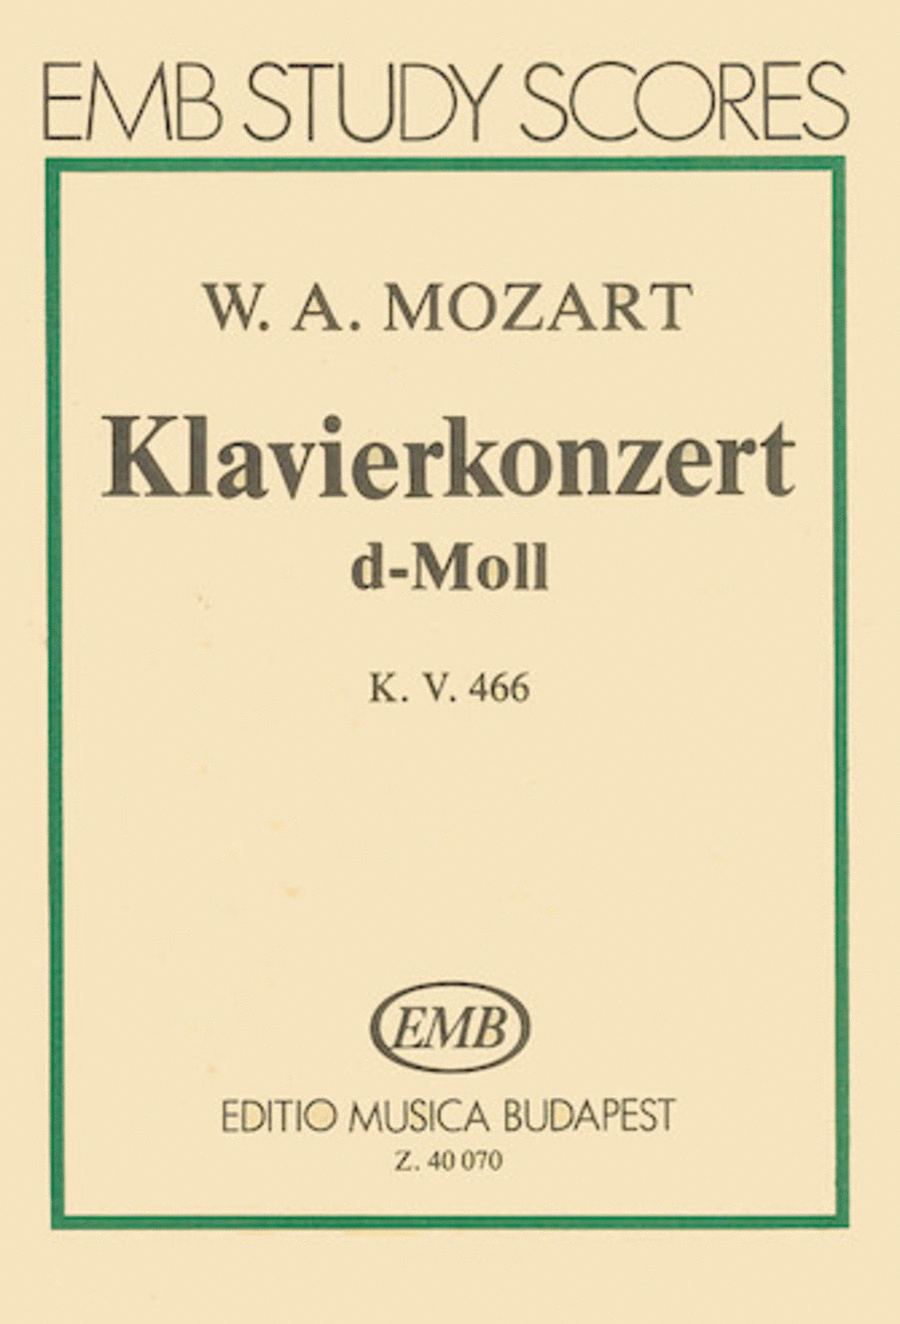 Concerto for Piano and Orchestra in D Minor, K. 466